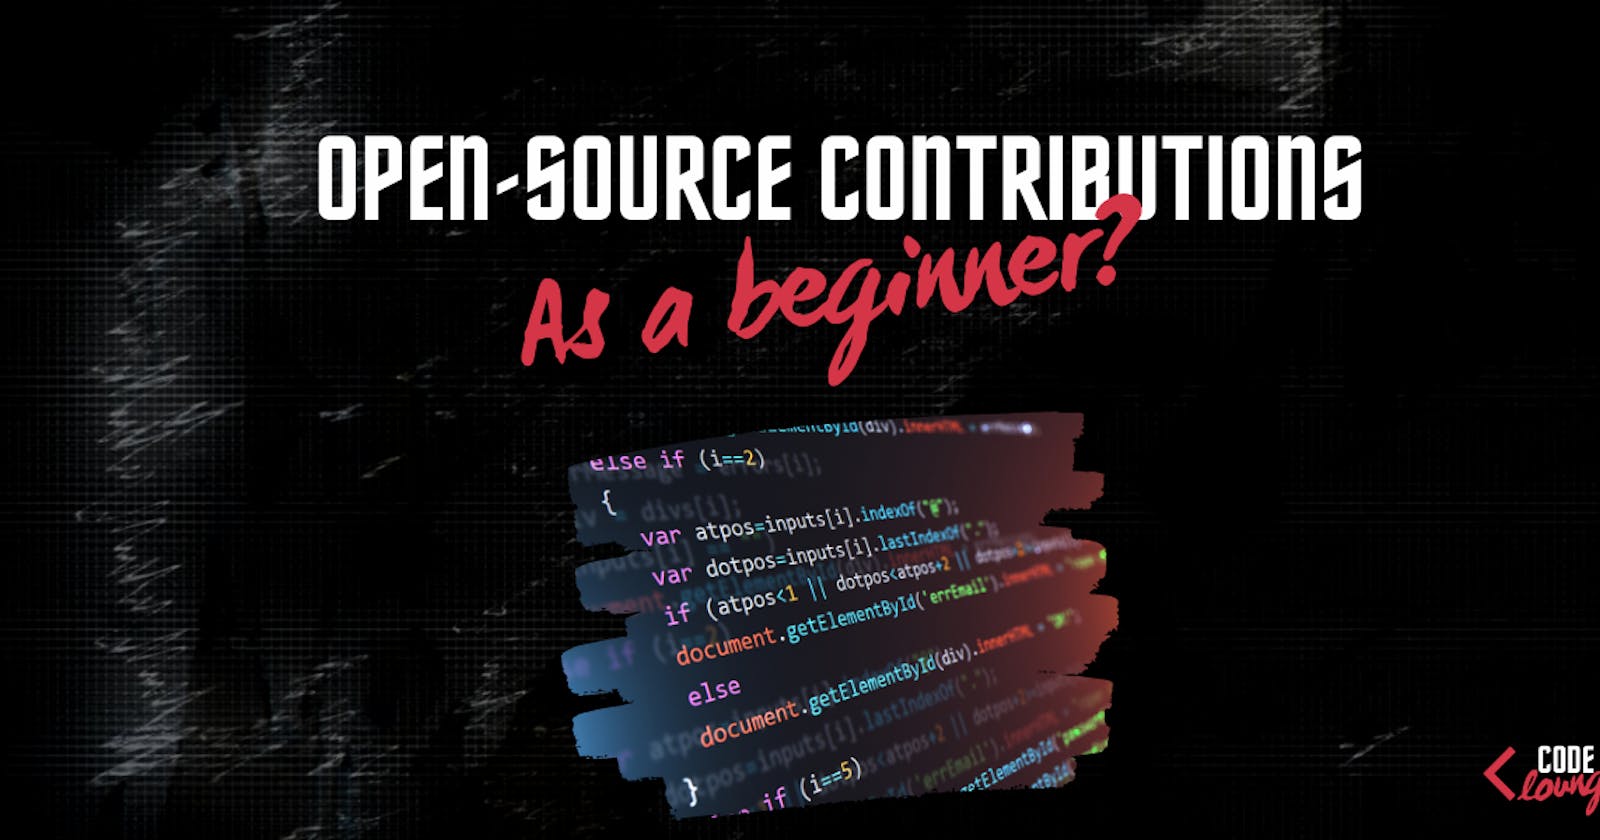 Getting Started With Open-Source: How To Contribute